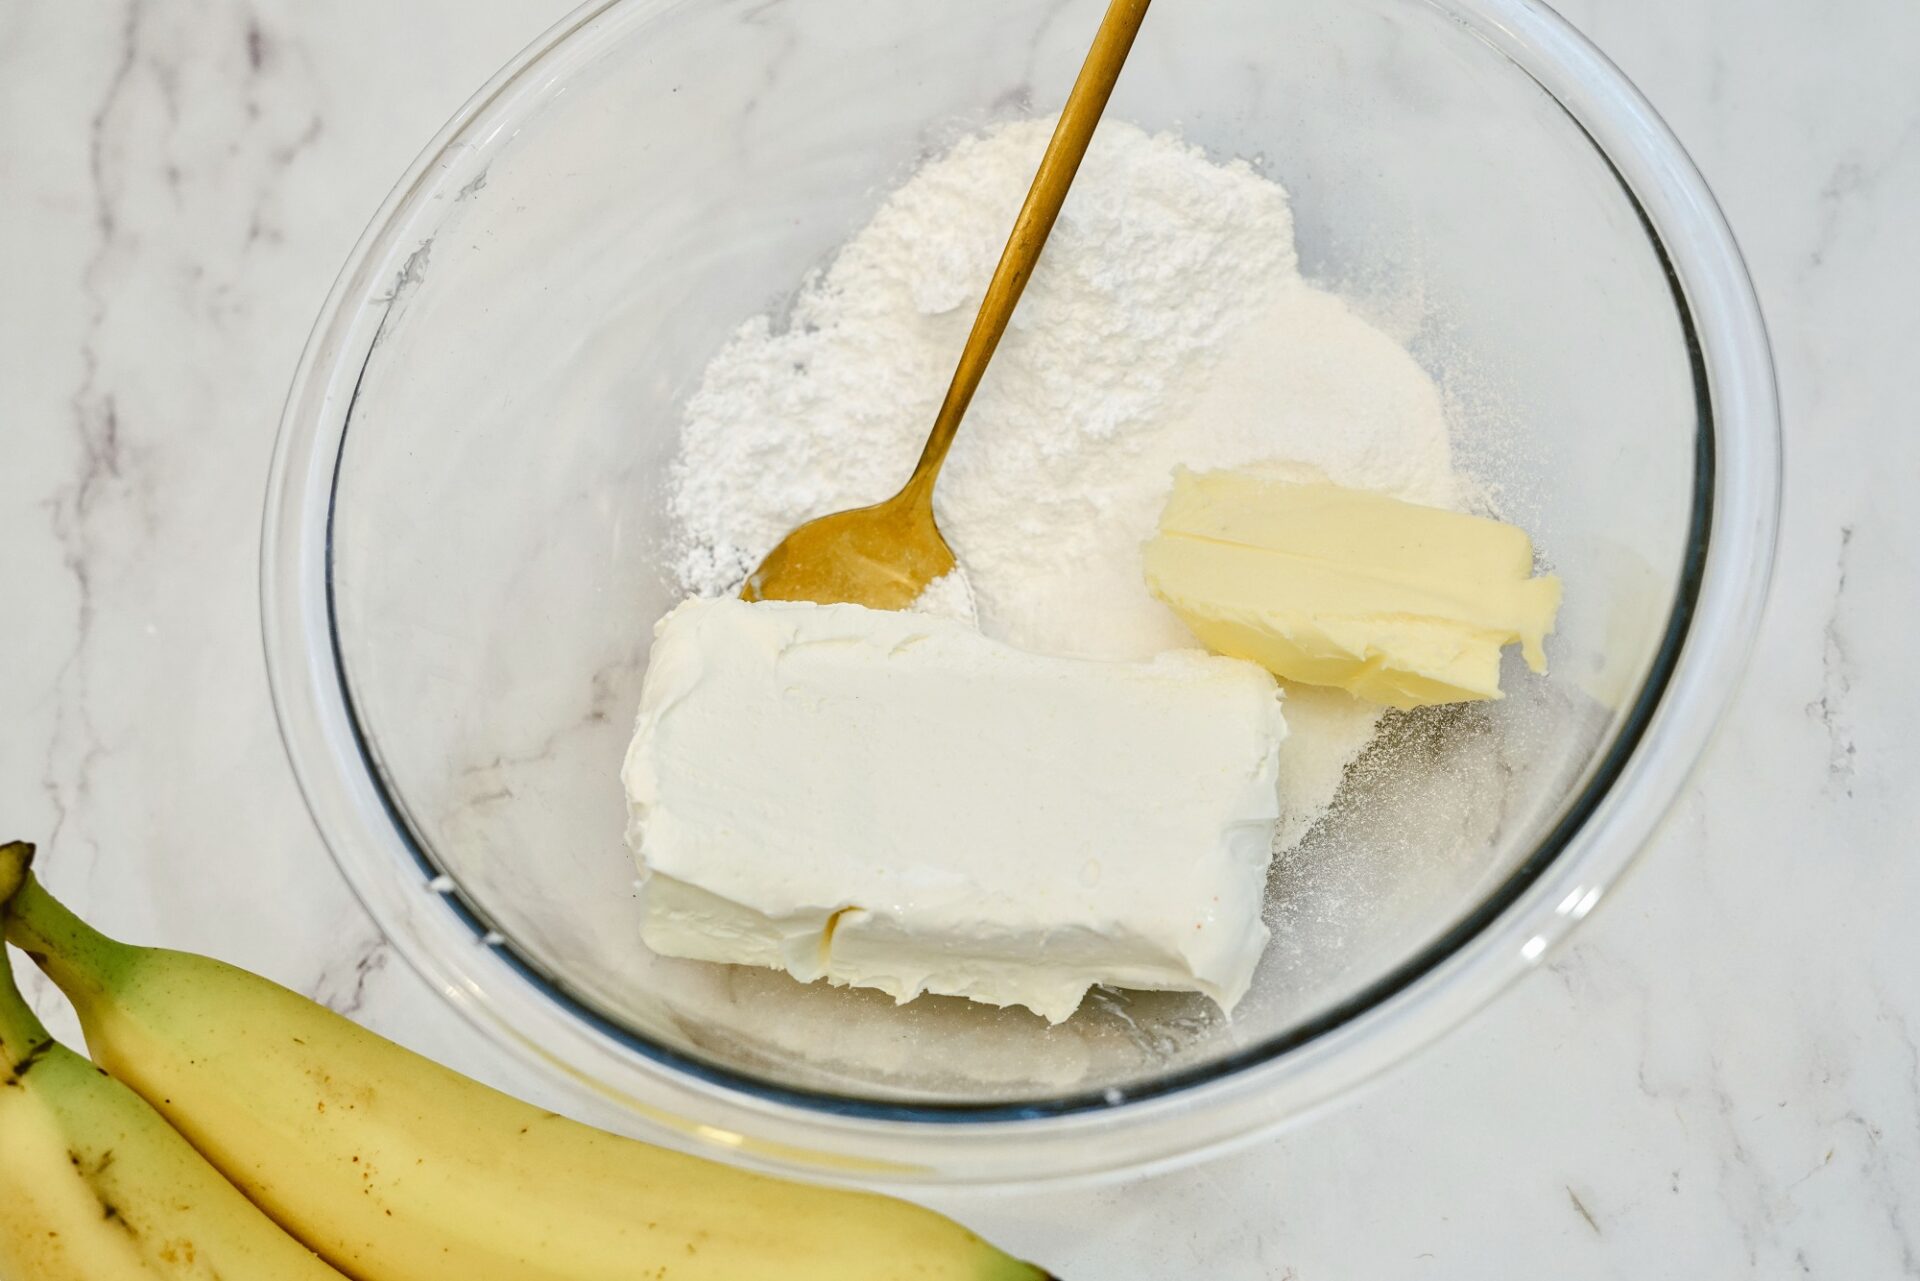 Mixing sugar, cream cheese, butter, and pudding mix in a glass bowl.